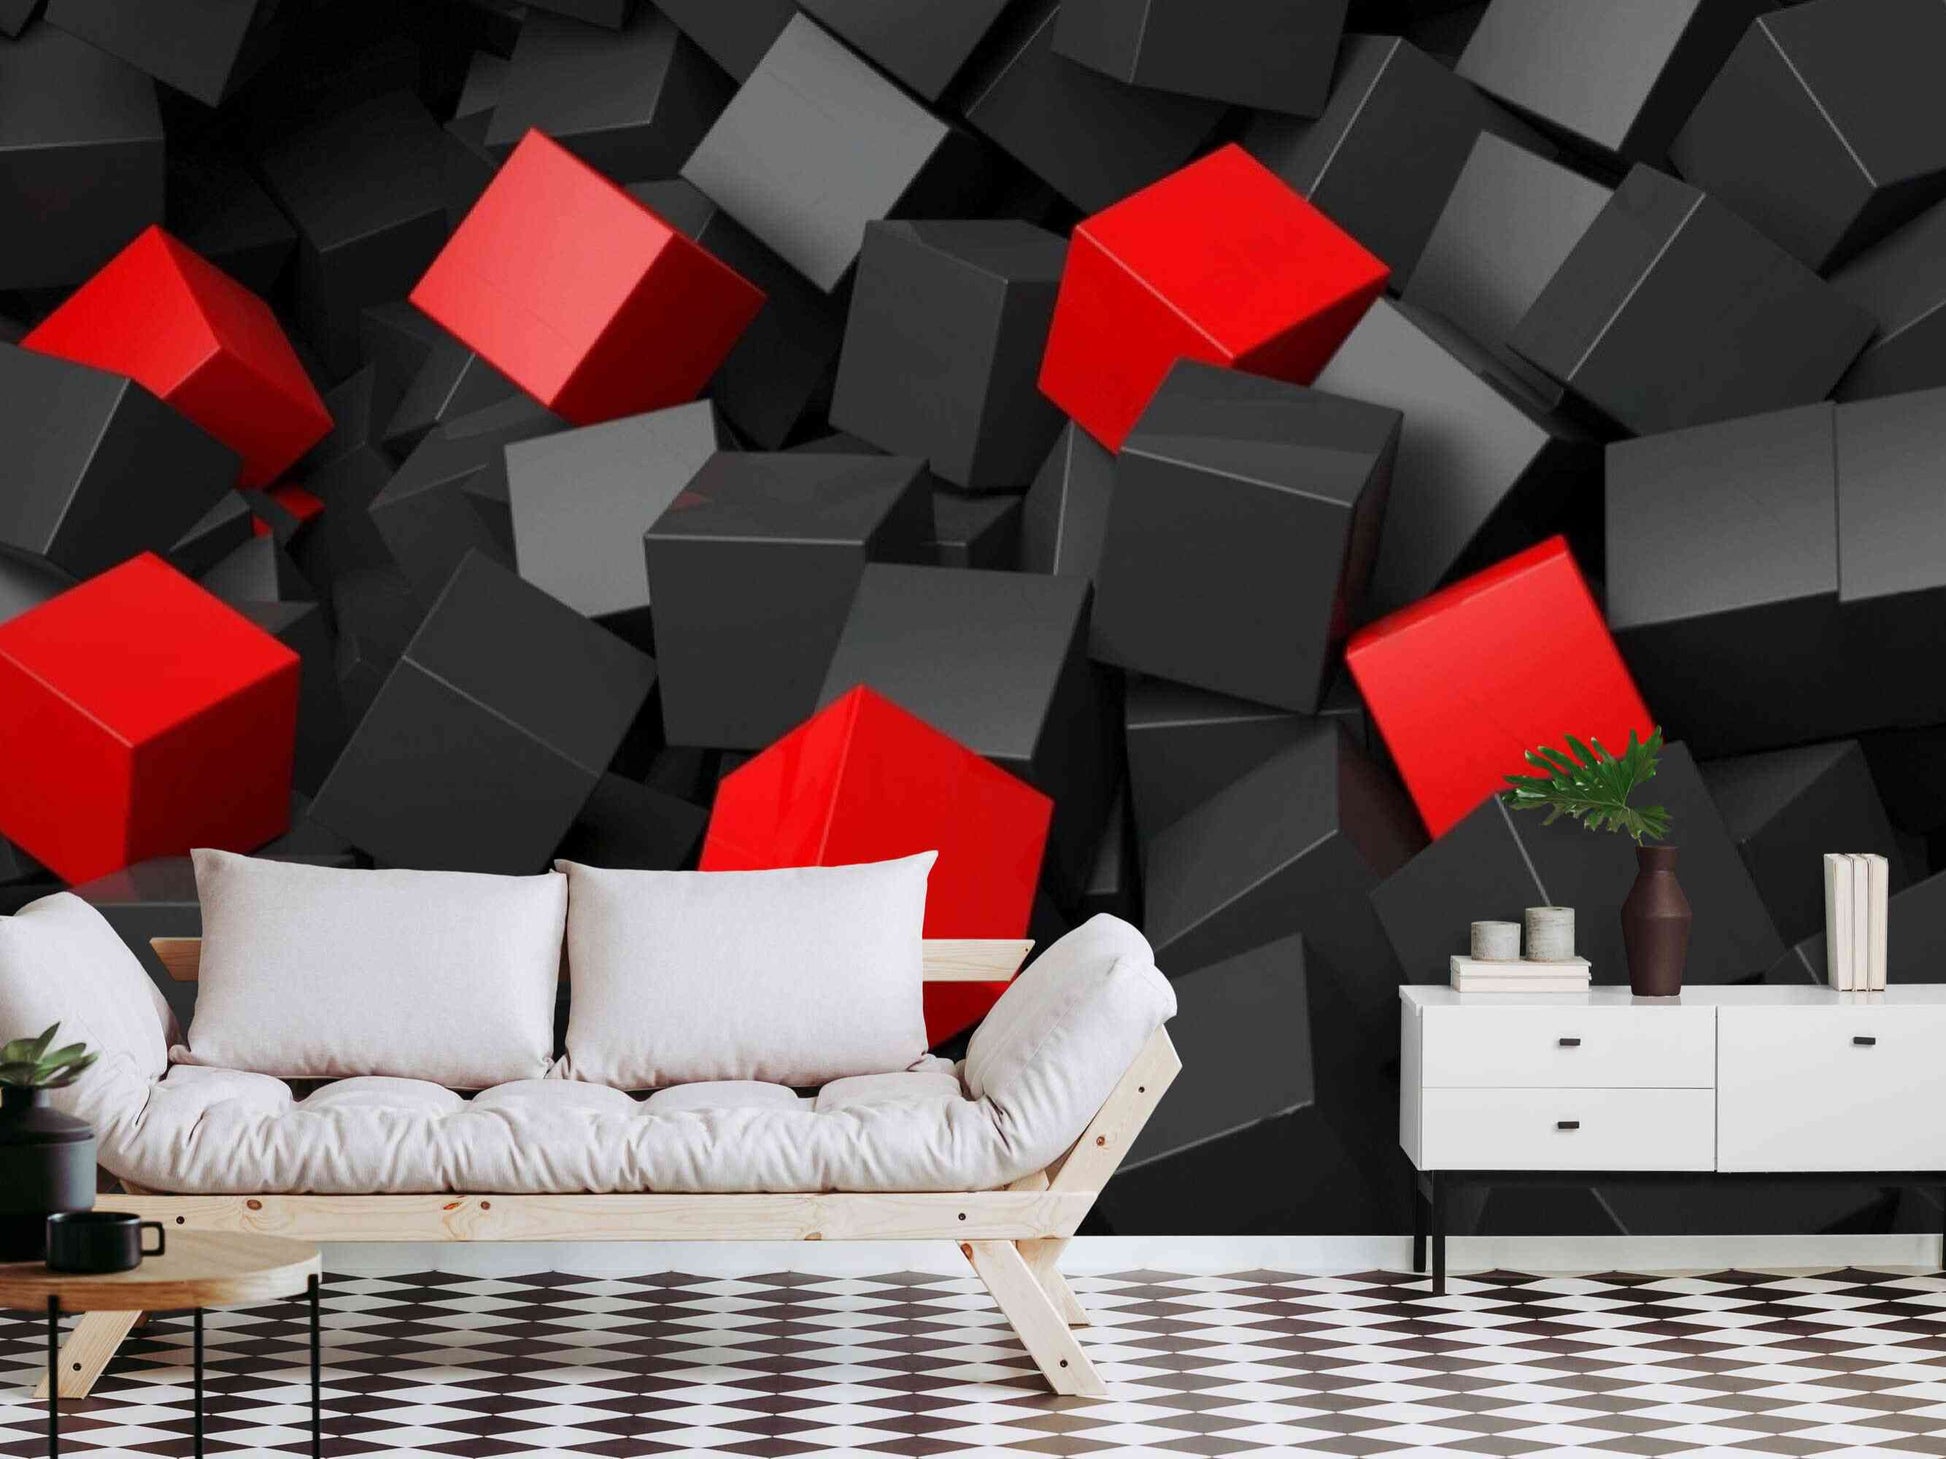 Eye-catching black and red geometric wallpaper adding vibrancy to a room